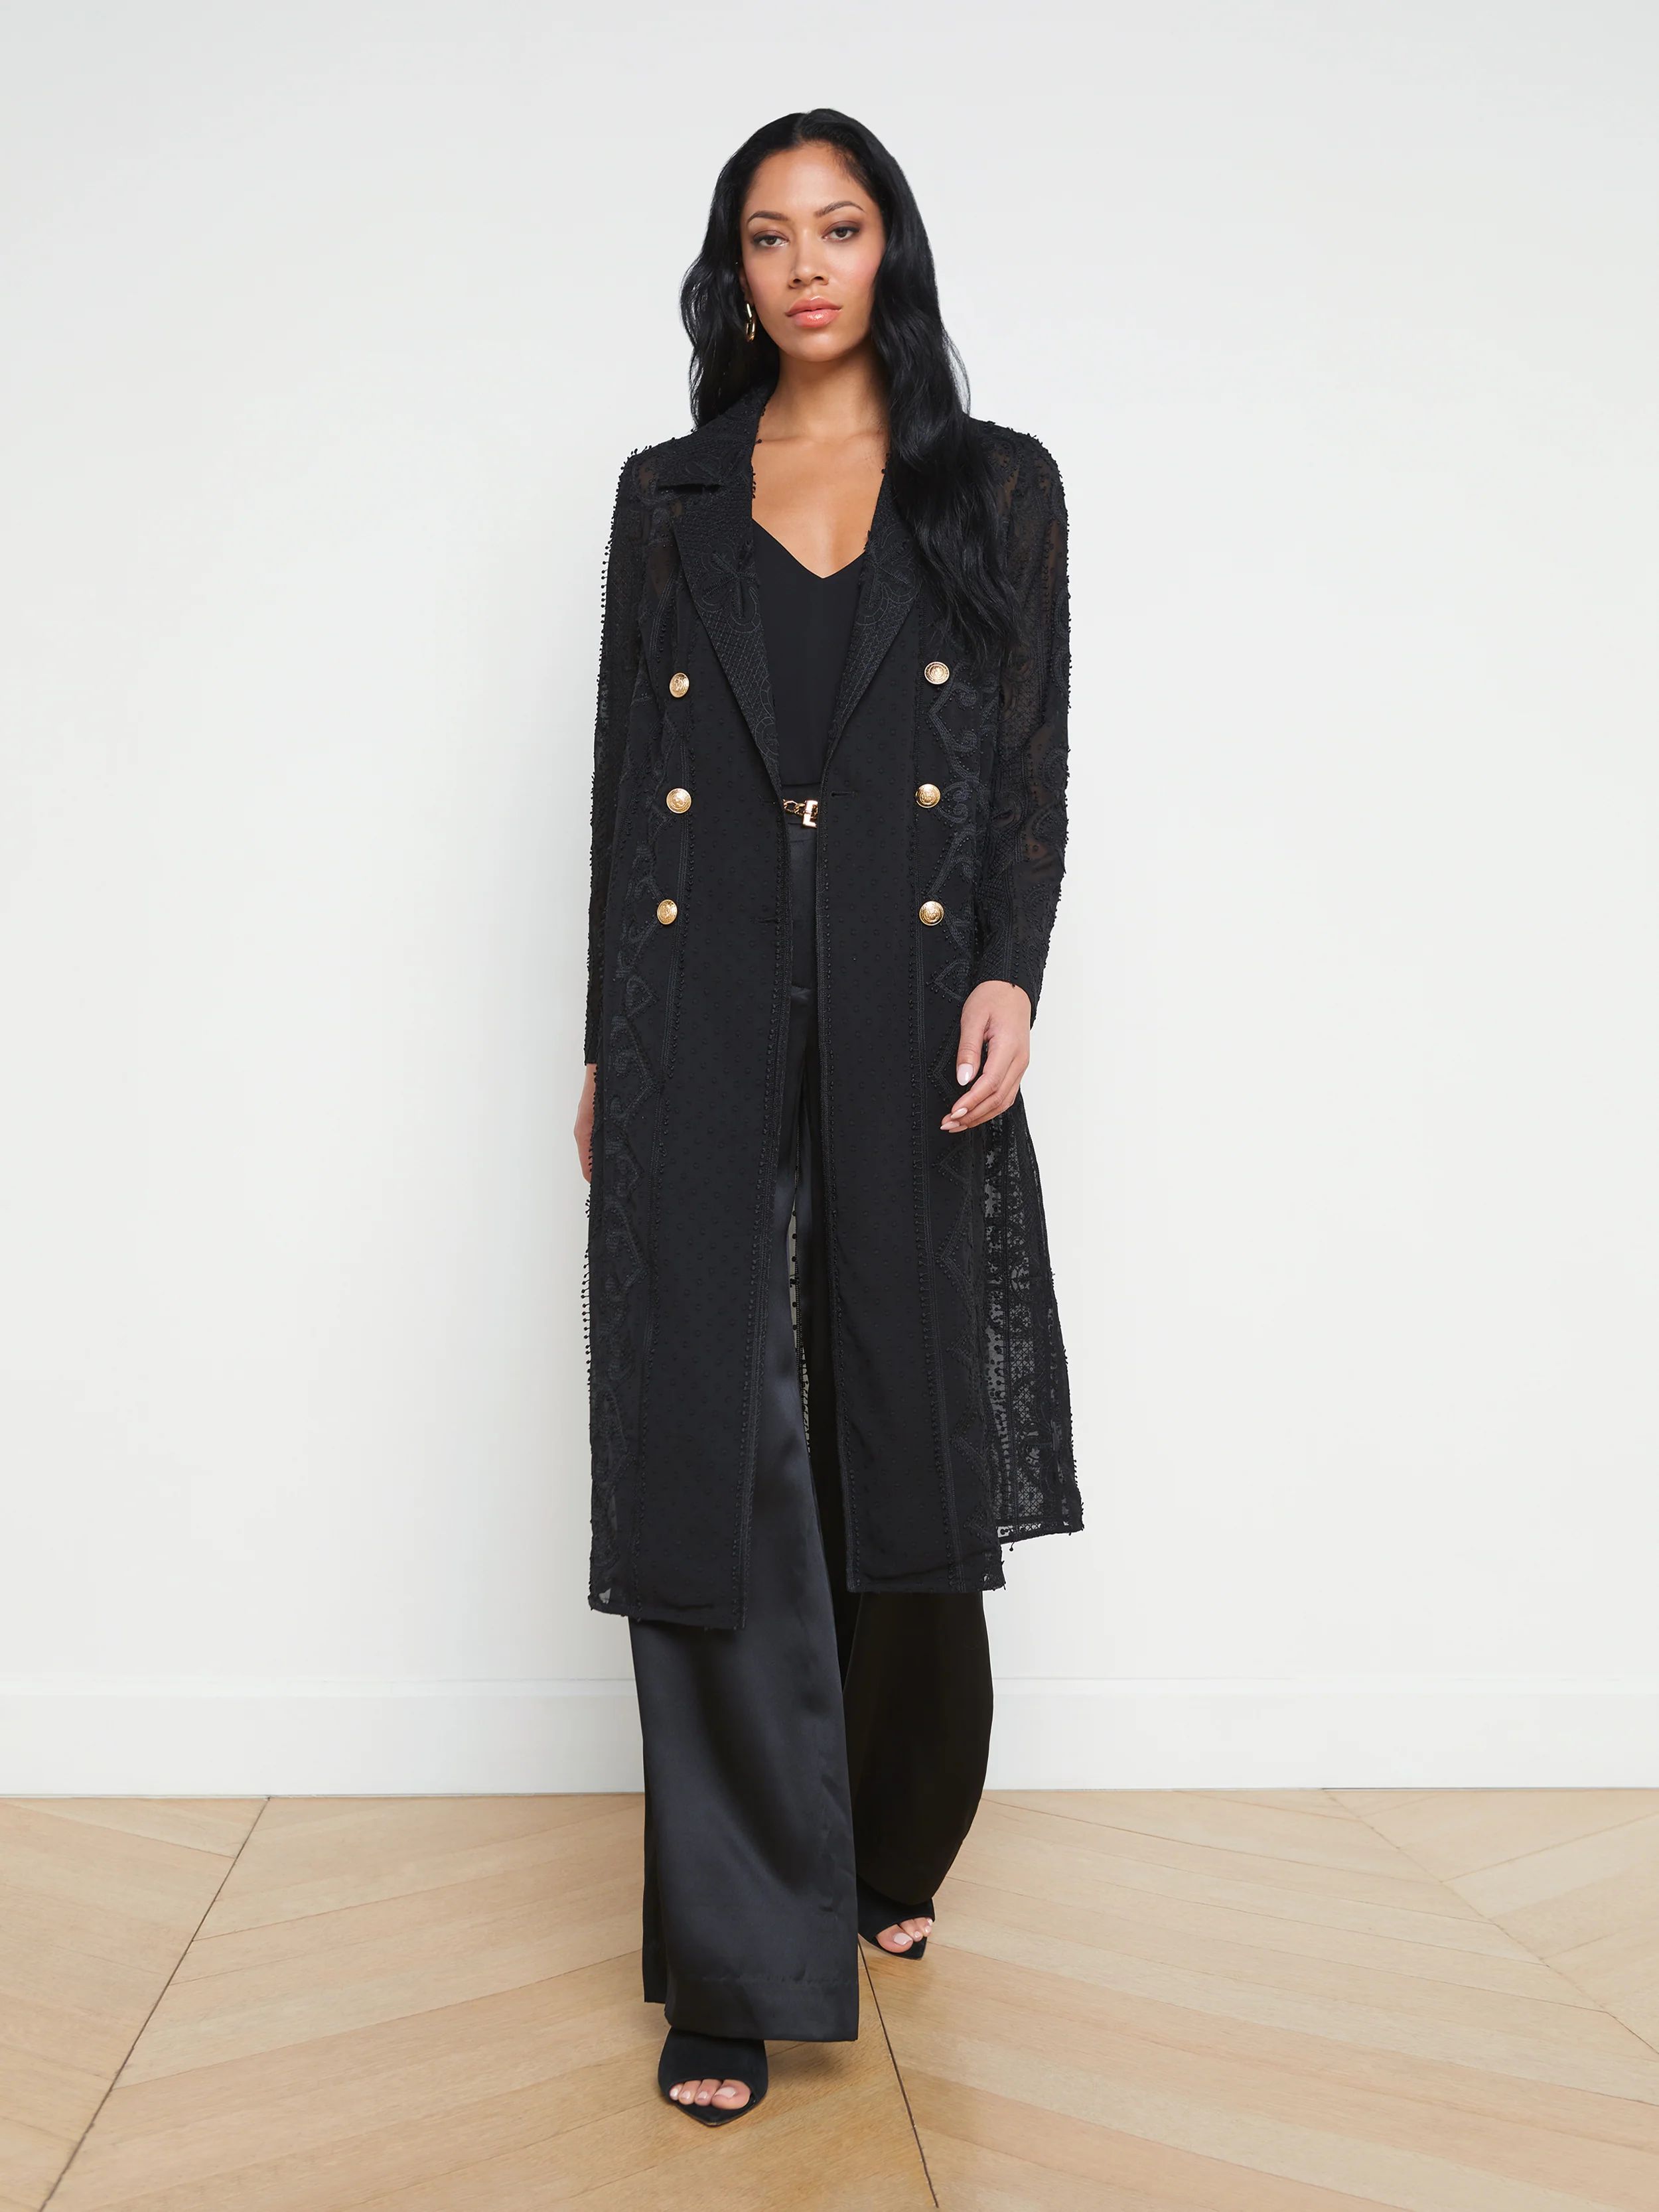 L'AGENCE - Dottie Lace Trench Coat in Black | L'Agence